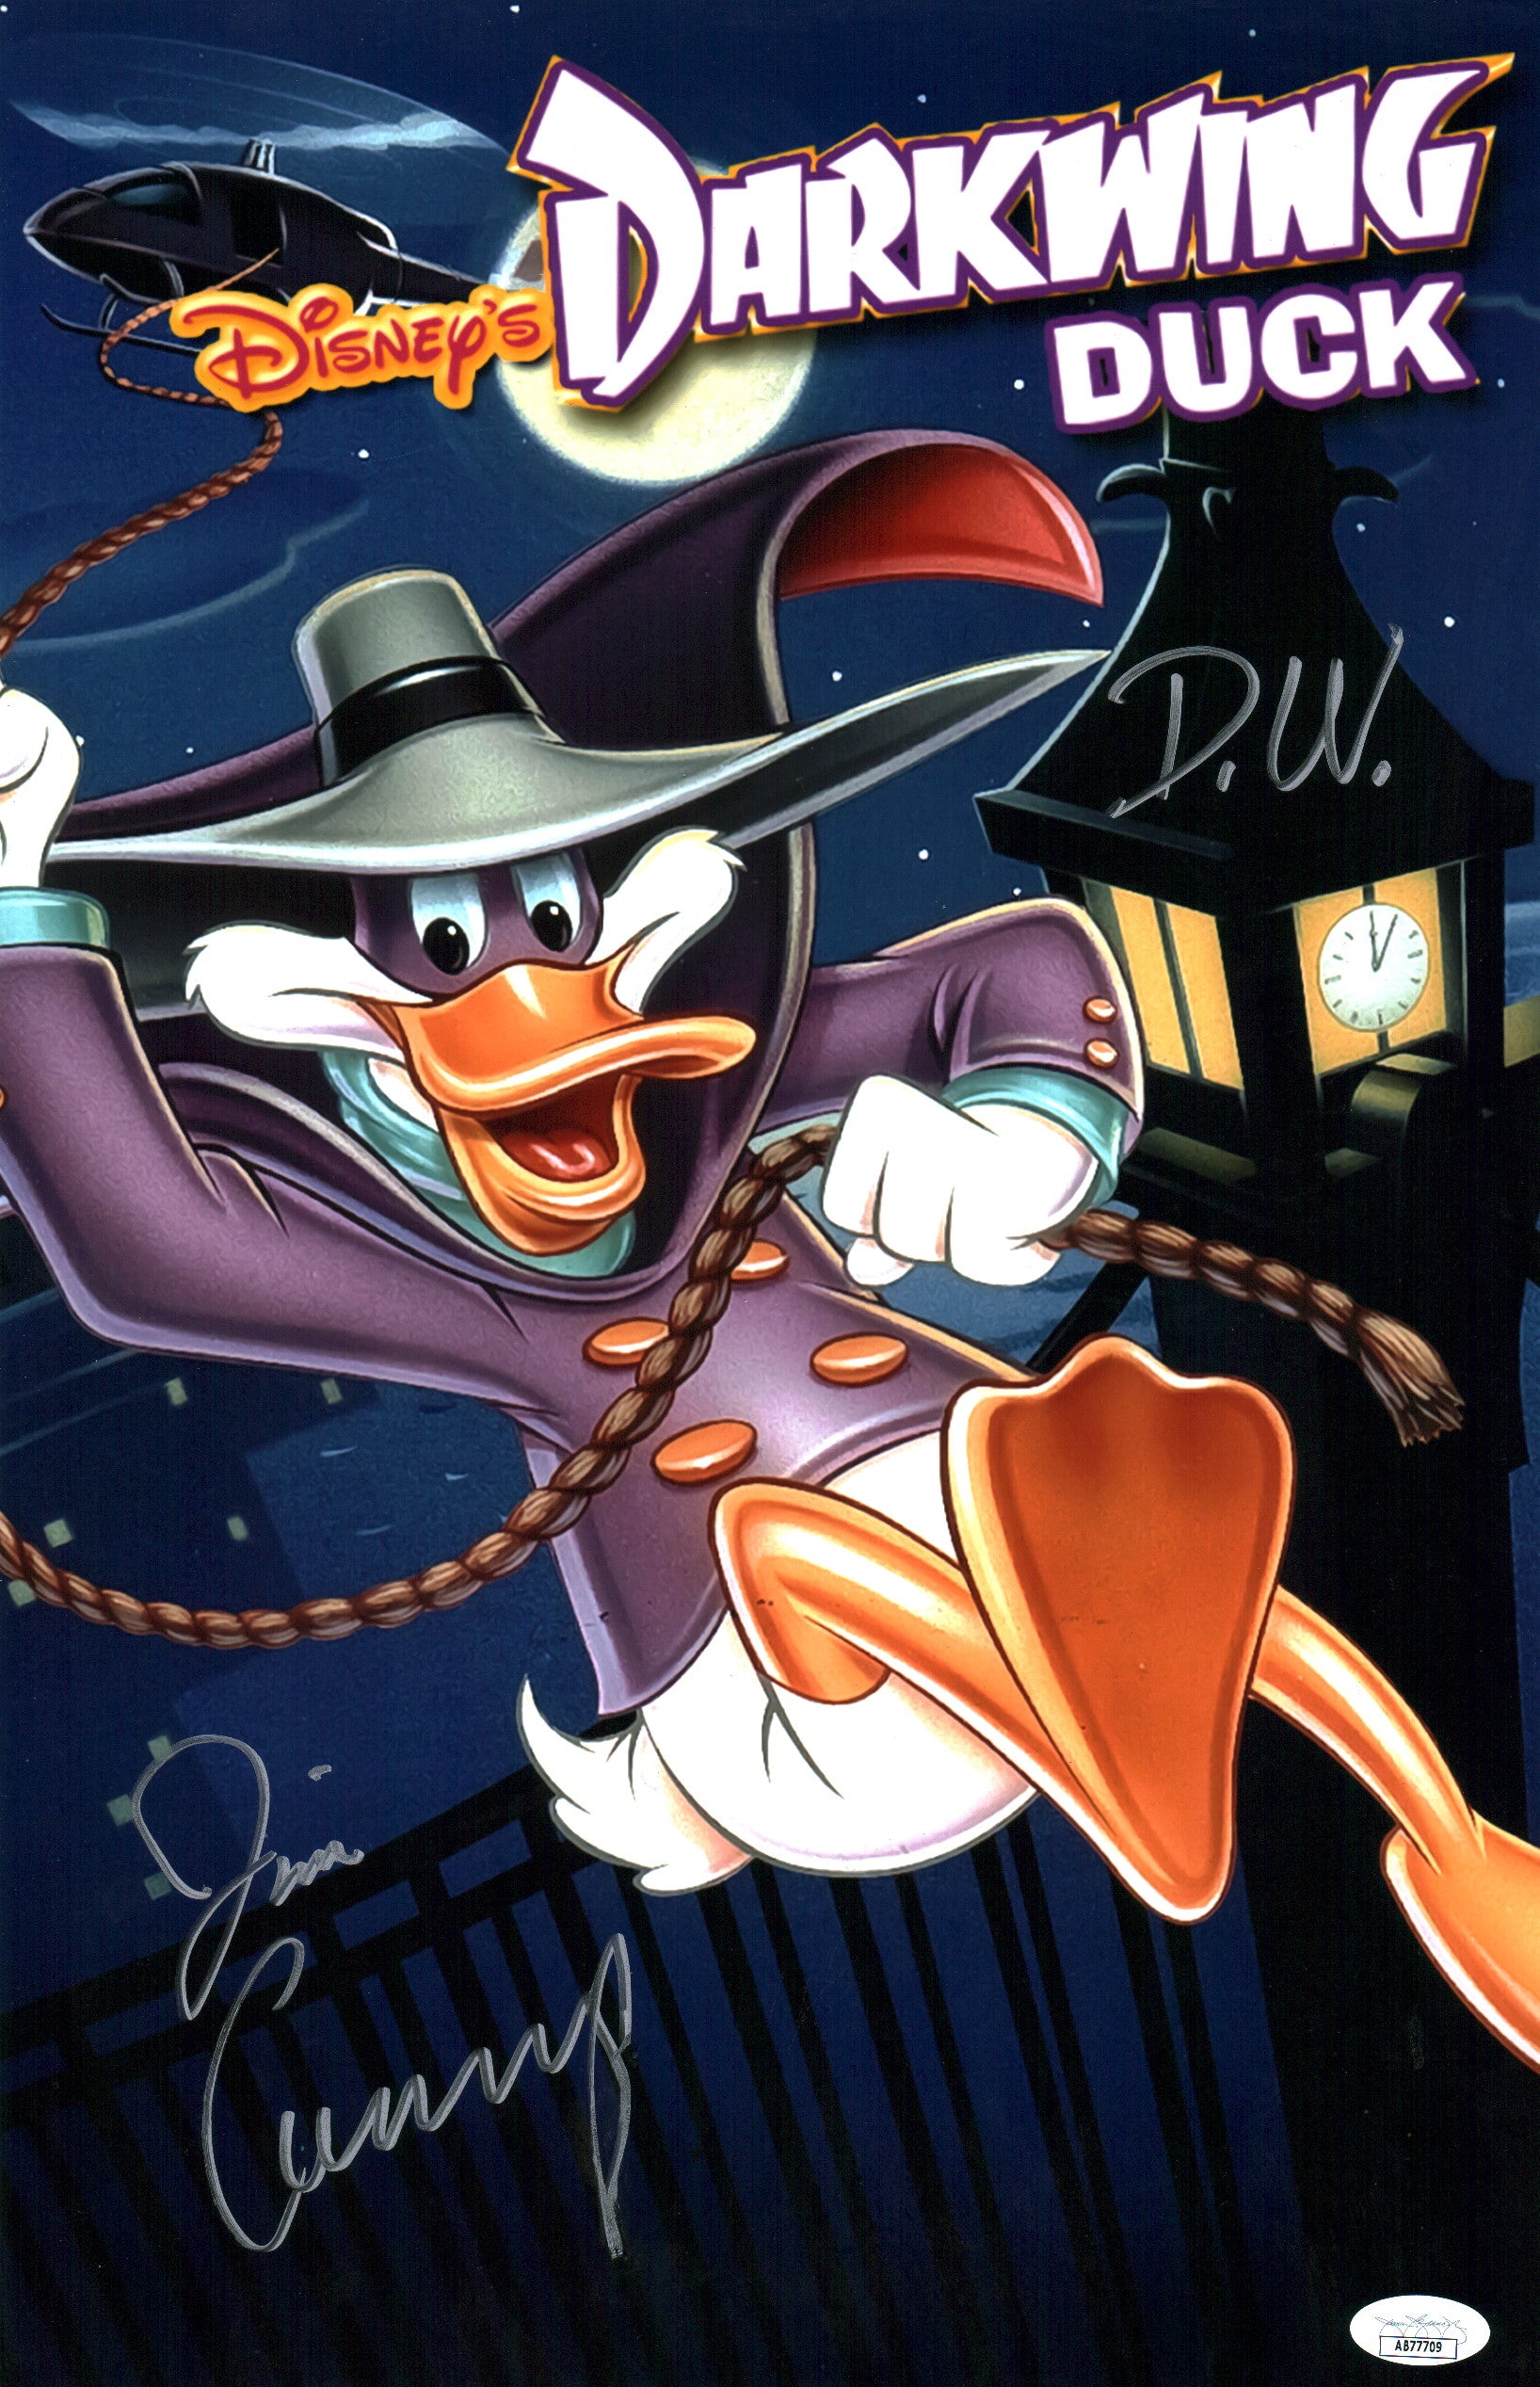 Jim Cummings Darkwing Duck 11x17 Signed Photo Poster JSA Certified Autograph GalaxyCon